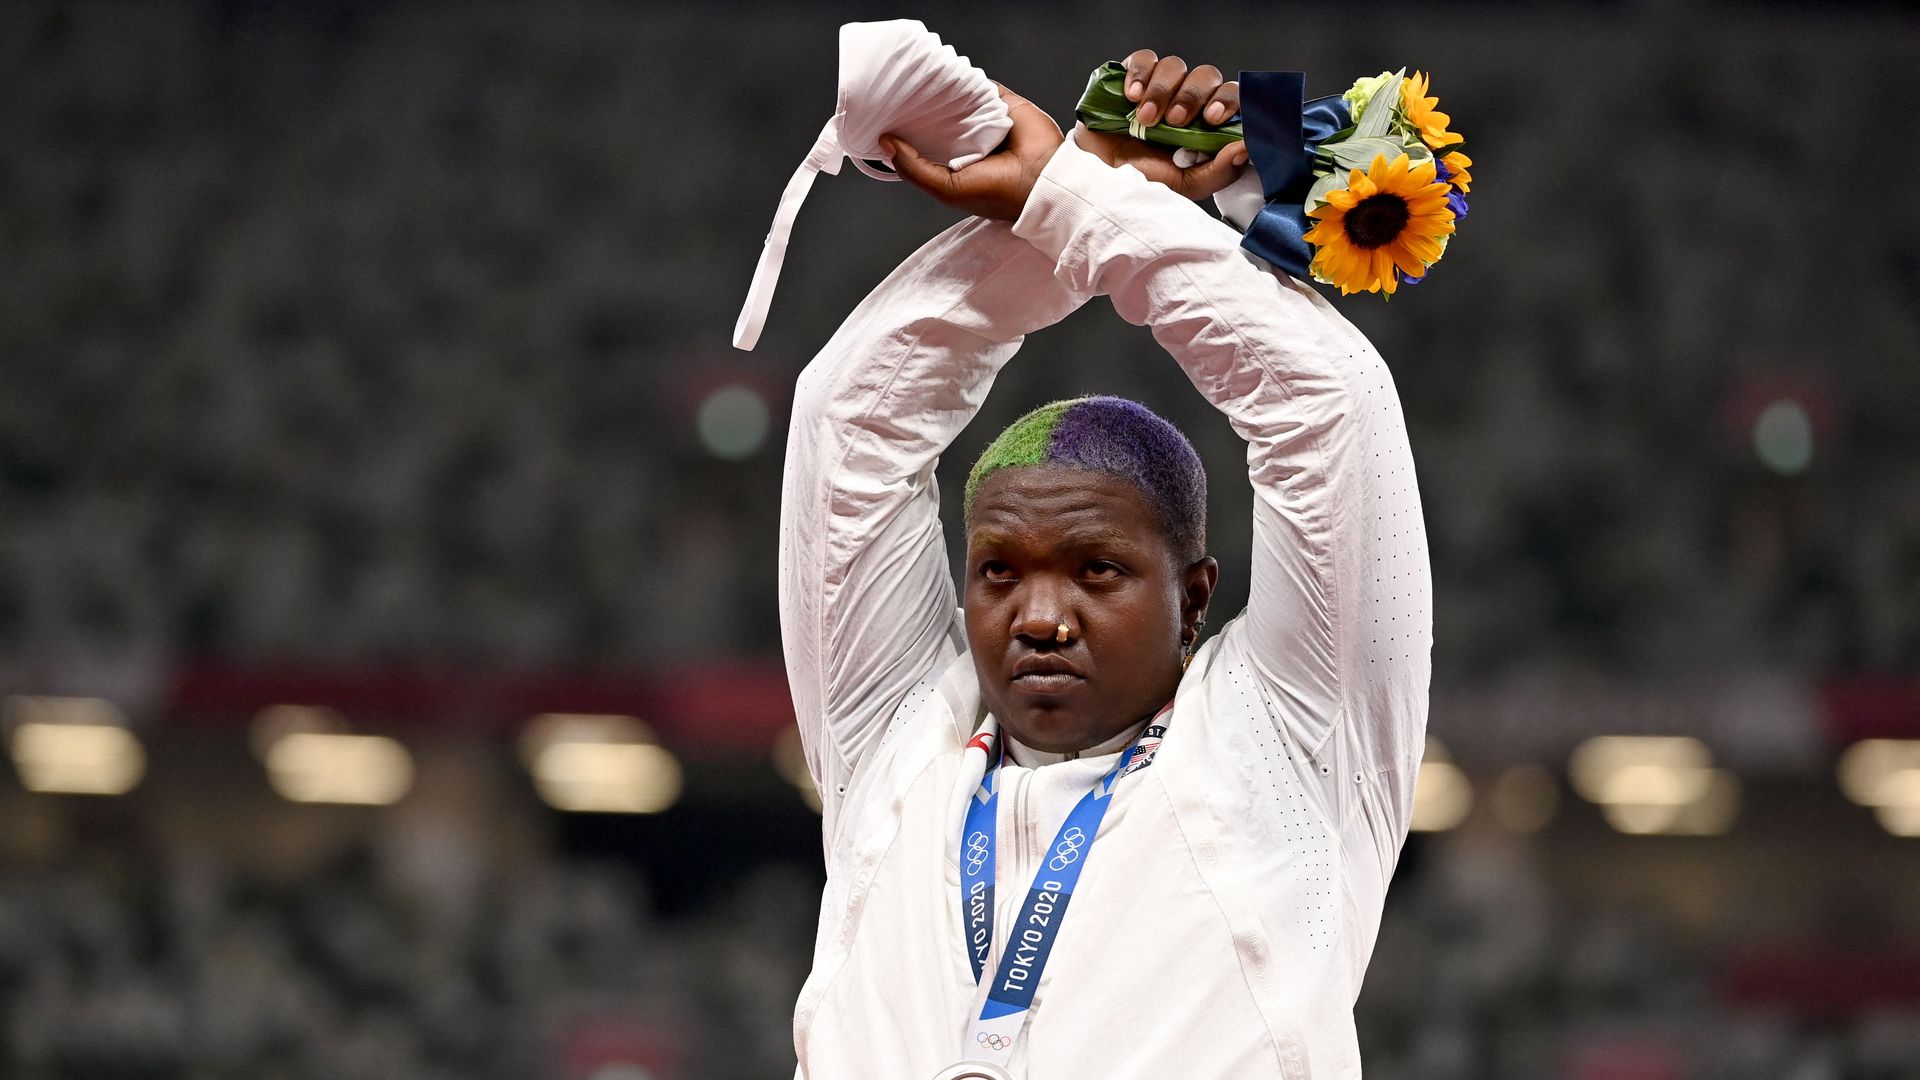 Second-placed USA's Raven Saunders gestures on the podium with her silver medal after competing the women's shot put event during the Tokyo 2020 Olympic Games